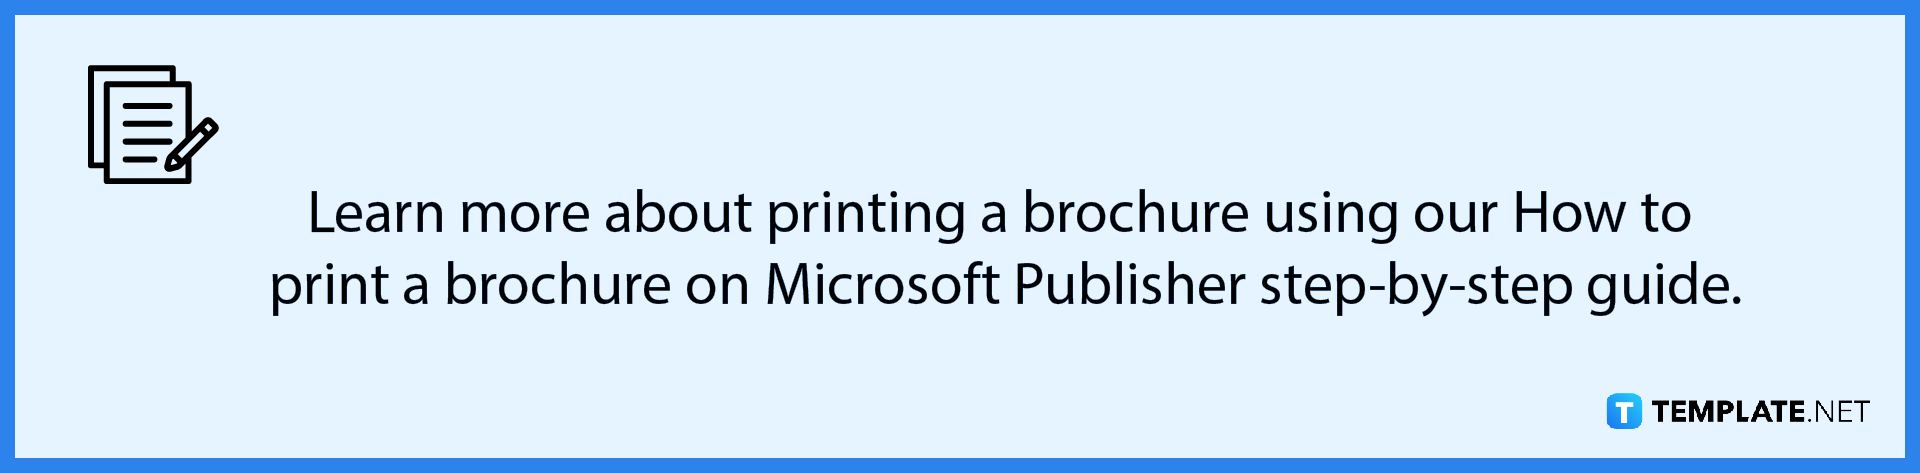 how-to-make-a-brochure-in-microsoft-publisher-note-2